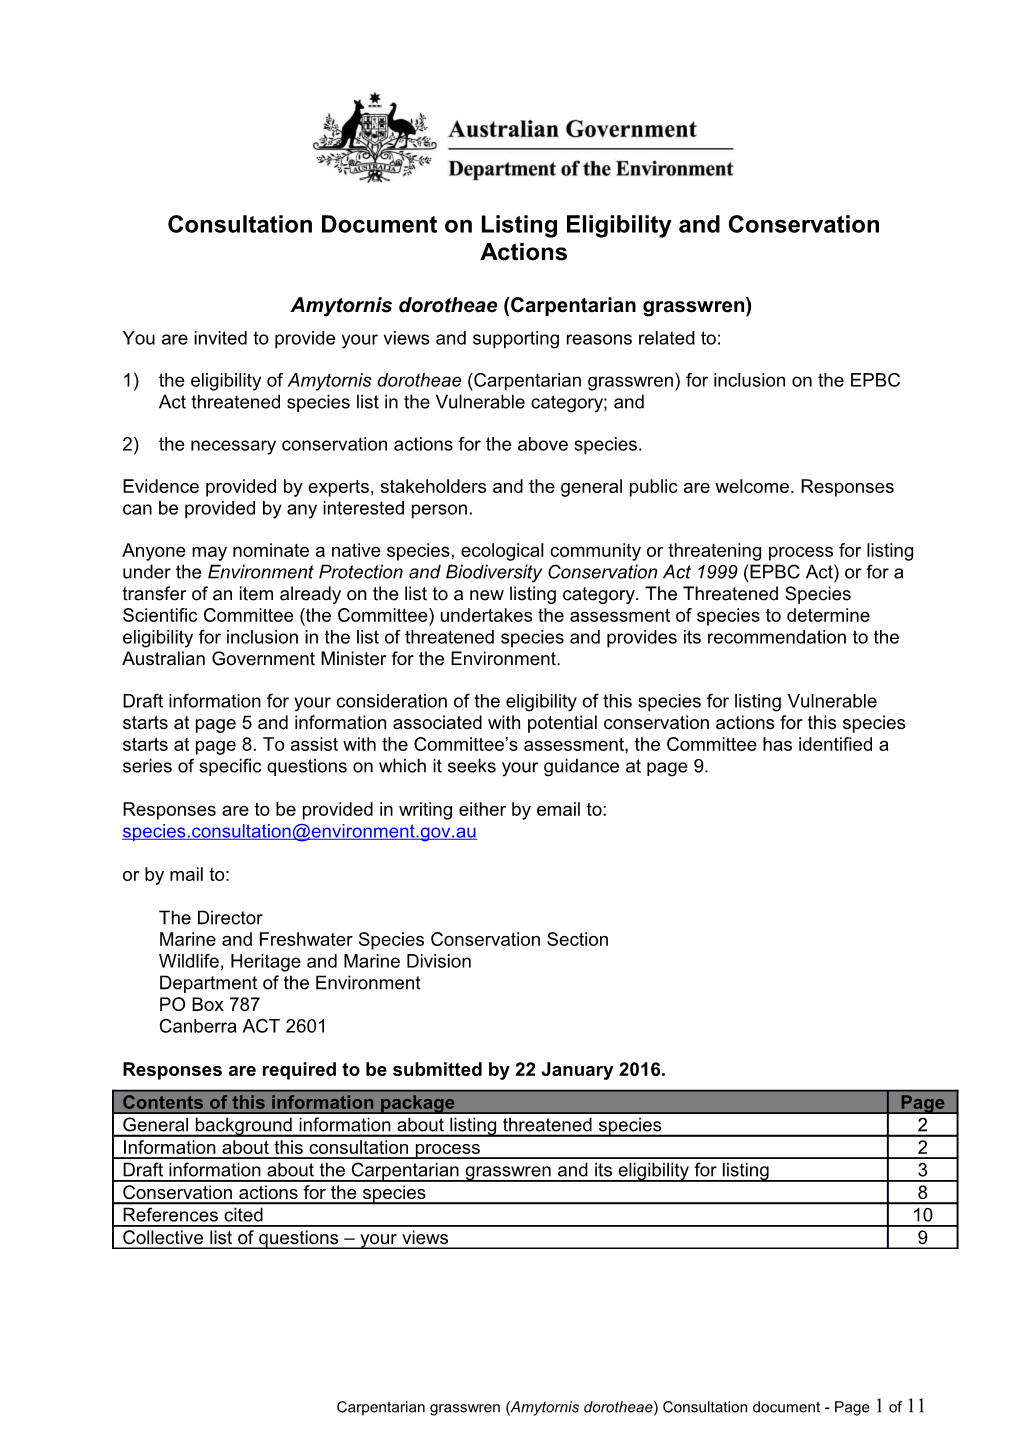 Consultation Document on Listing Eligibility and Conservation Actions - Amytornis Dorotheae